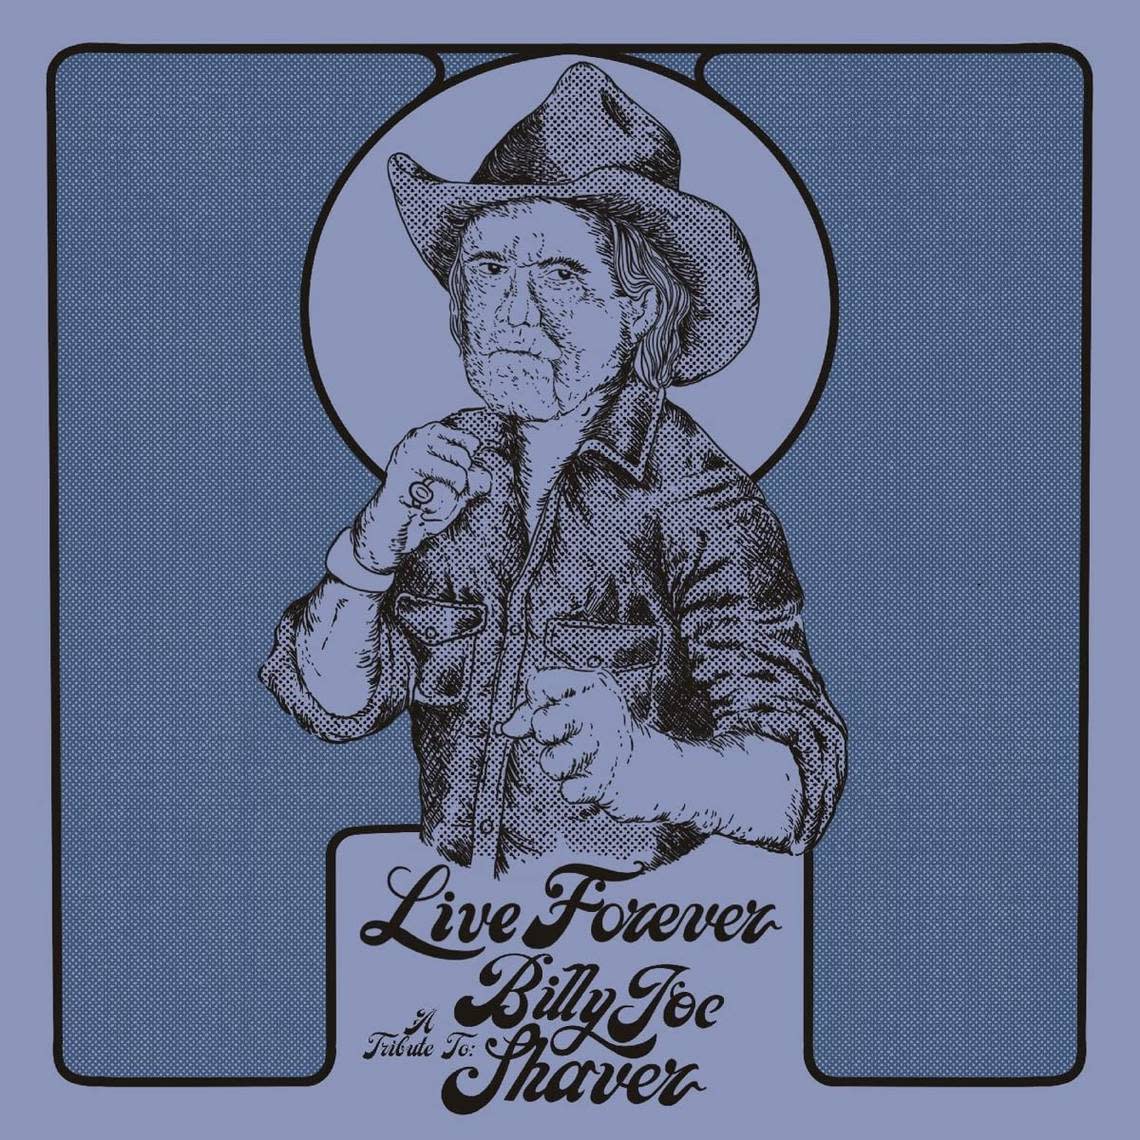 Various Artists – “Live Forever: A Tribute to Billy Joe Shaver”